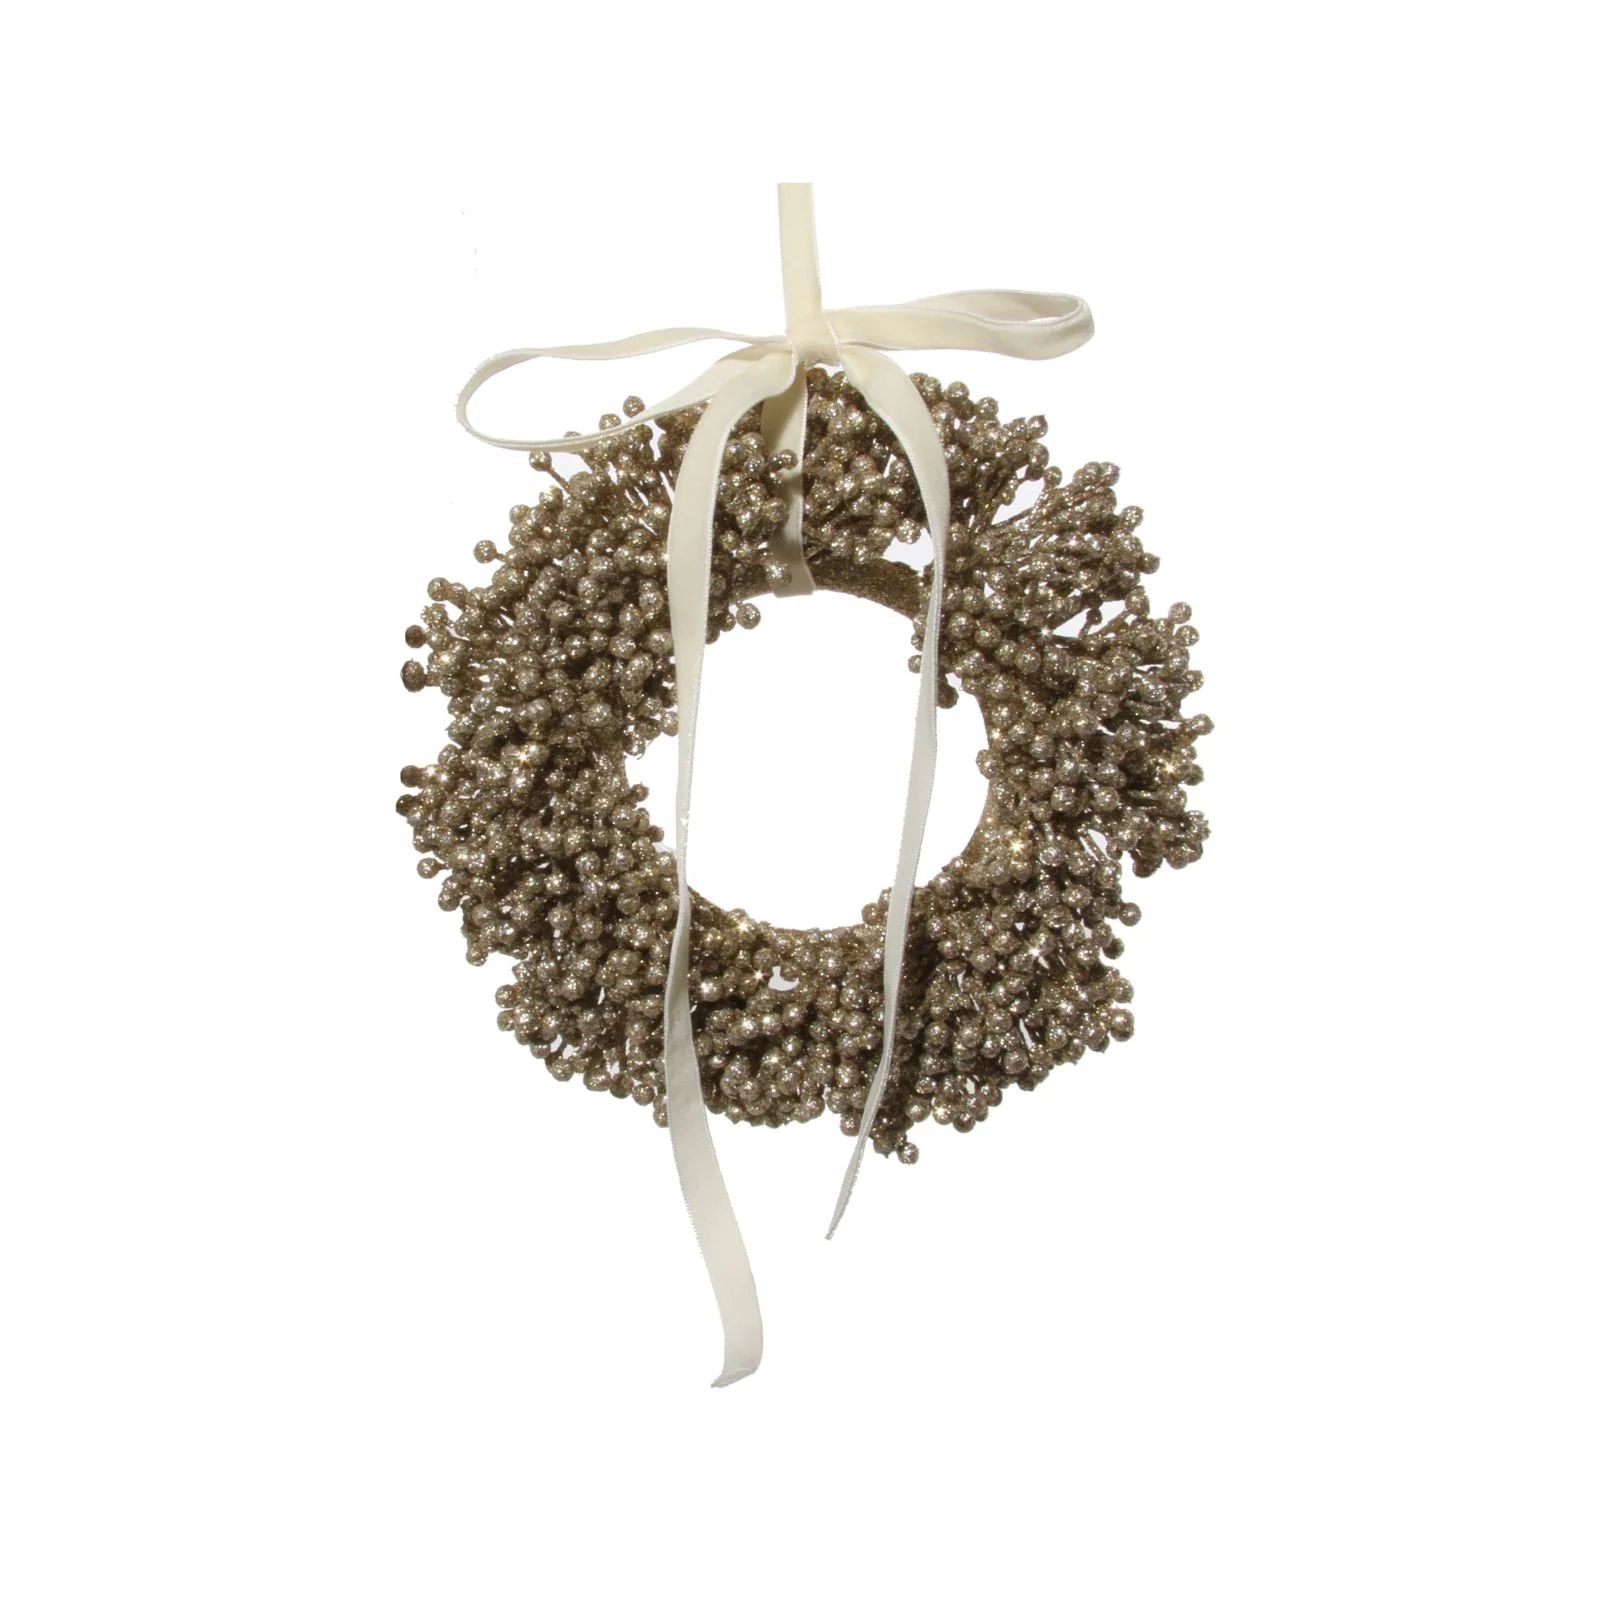 Berry Wreath Ornament | Brooke and Lou